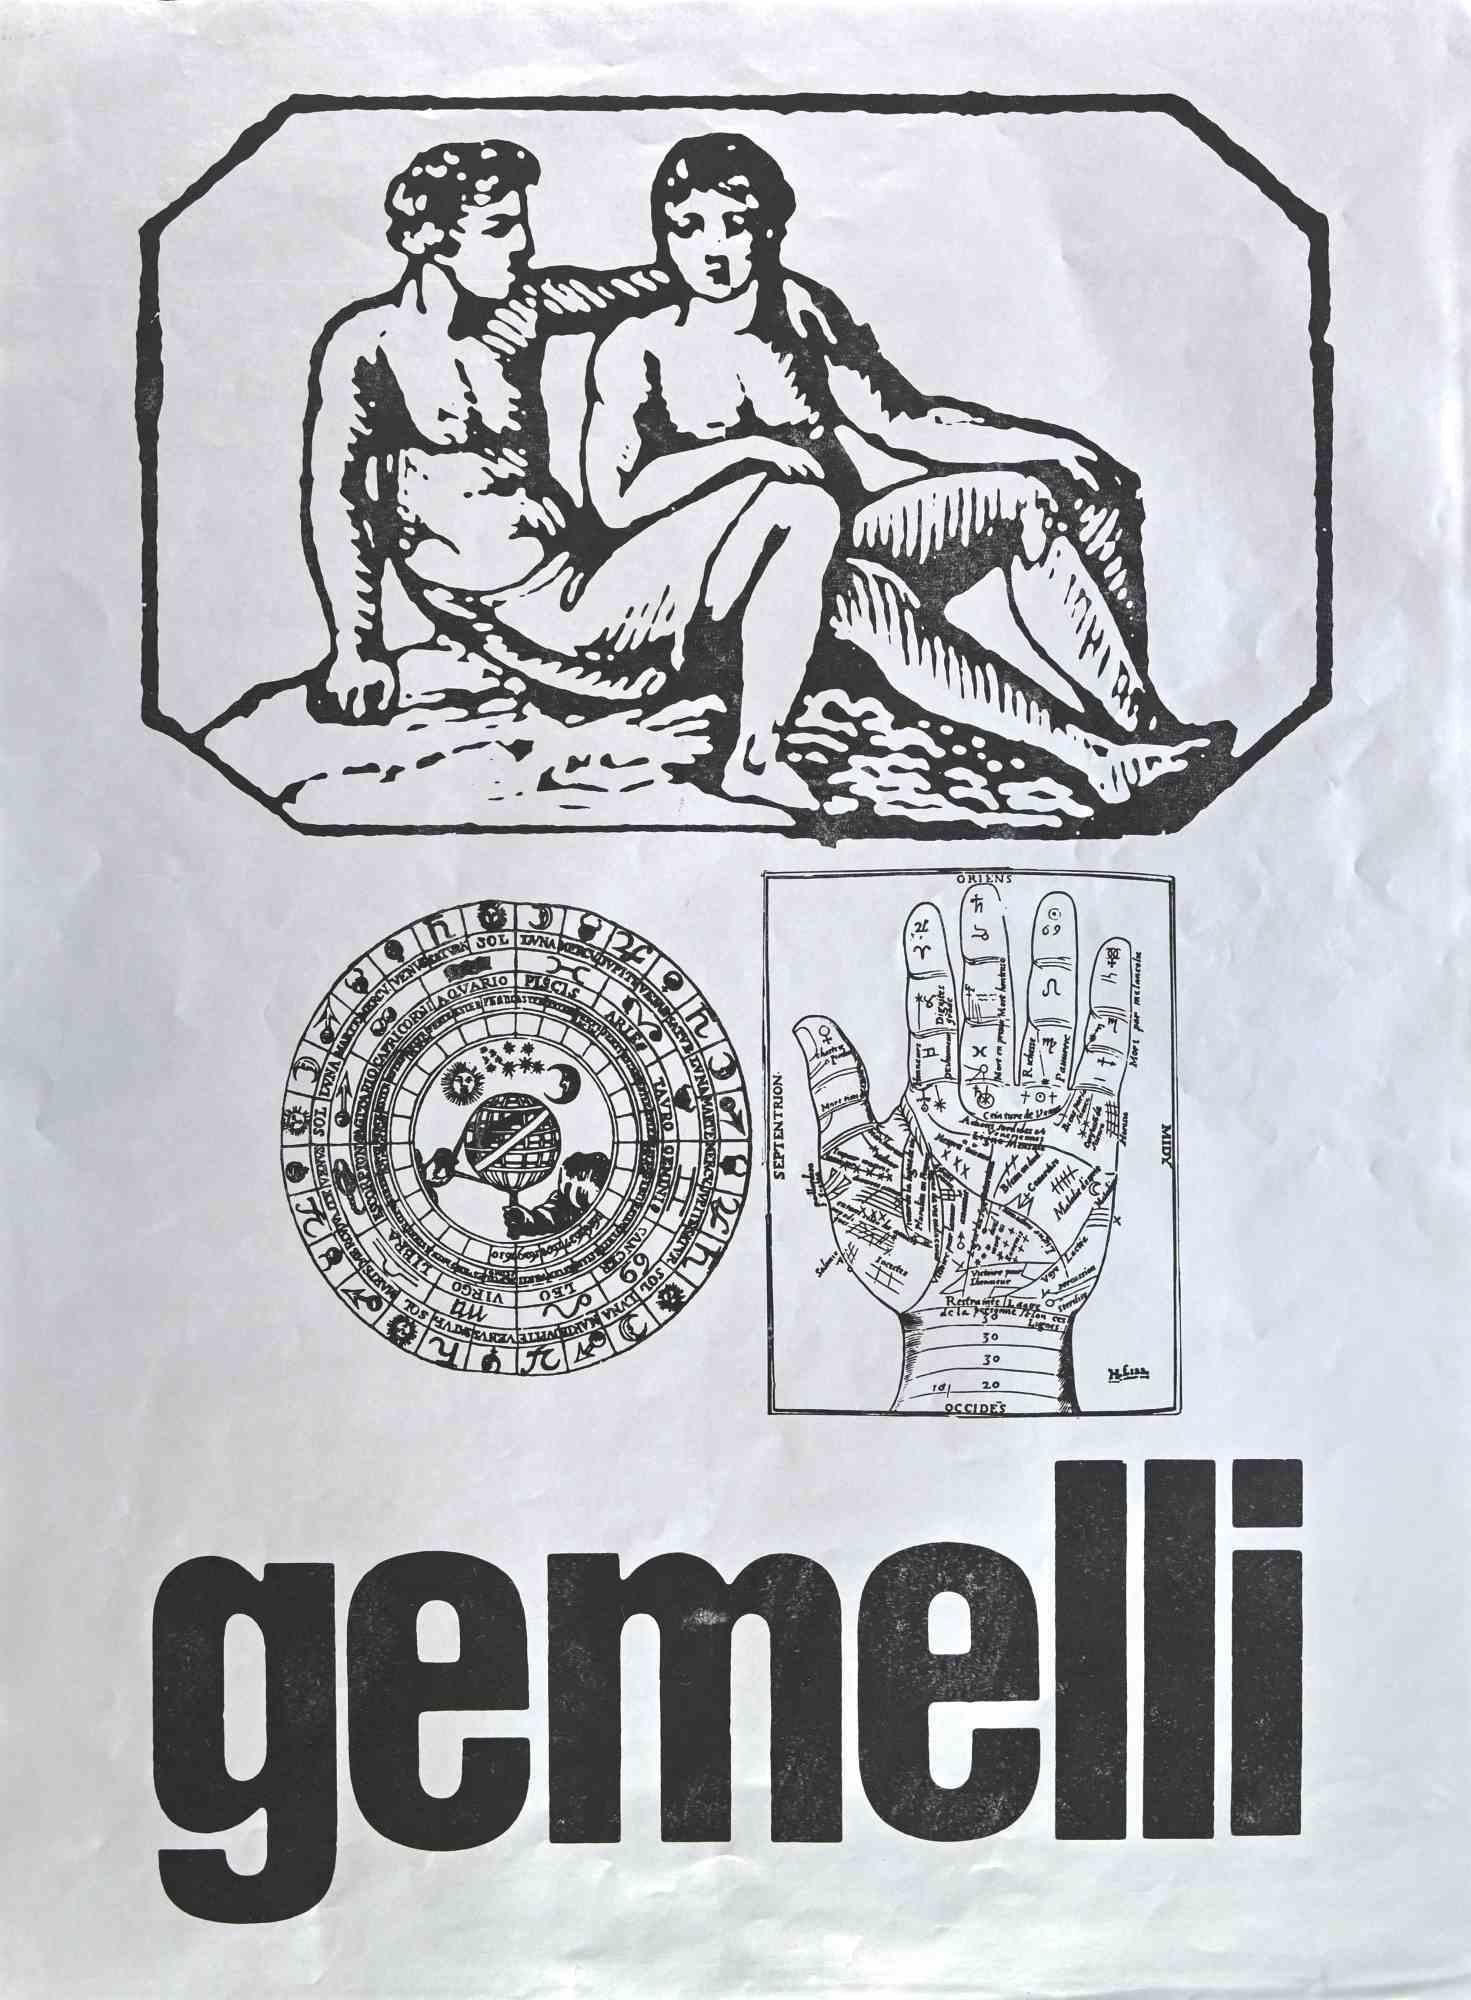 Gemini  is a screen print  on grey paper realized by  Sergio Barletta in 1973. 

68 x 49 cm.

Good conditions except for some signs of aging on the edges.

 

Sergio Barletta  (1934) is an Italian cartoonist and illustrator, who has also published